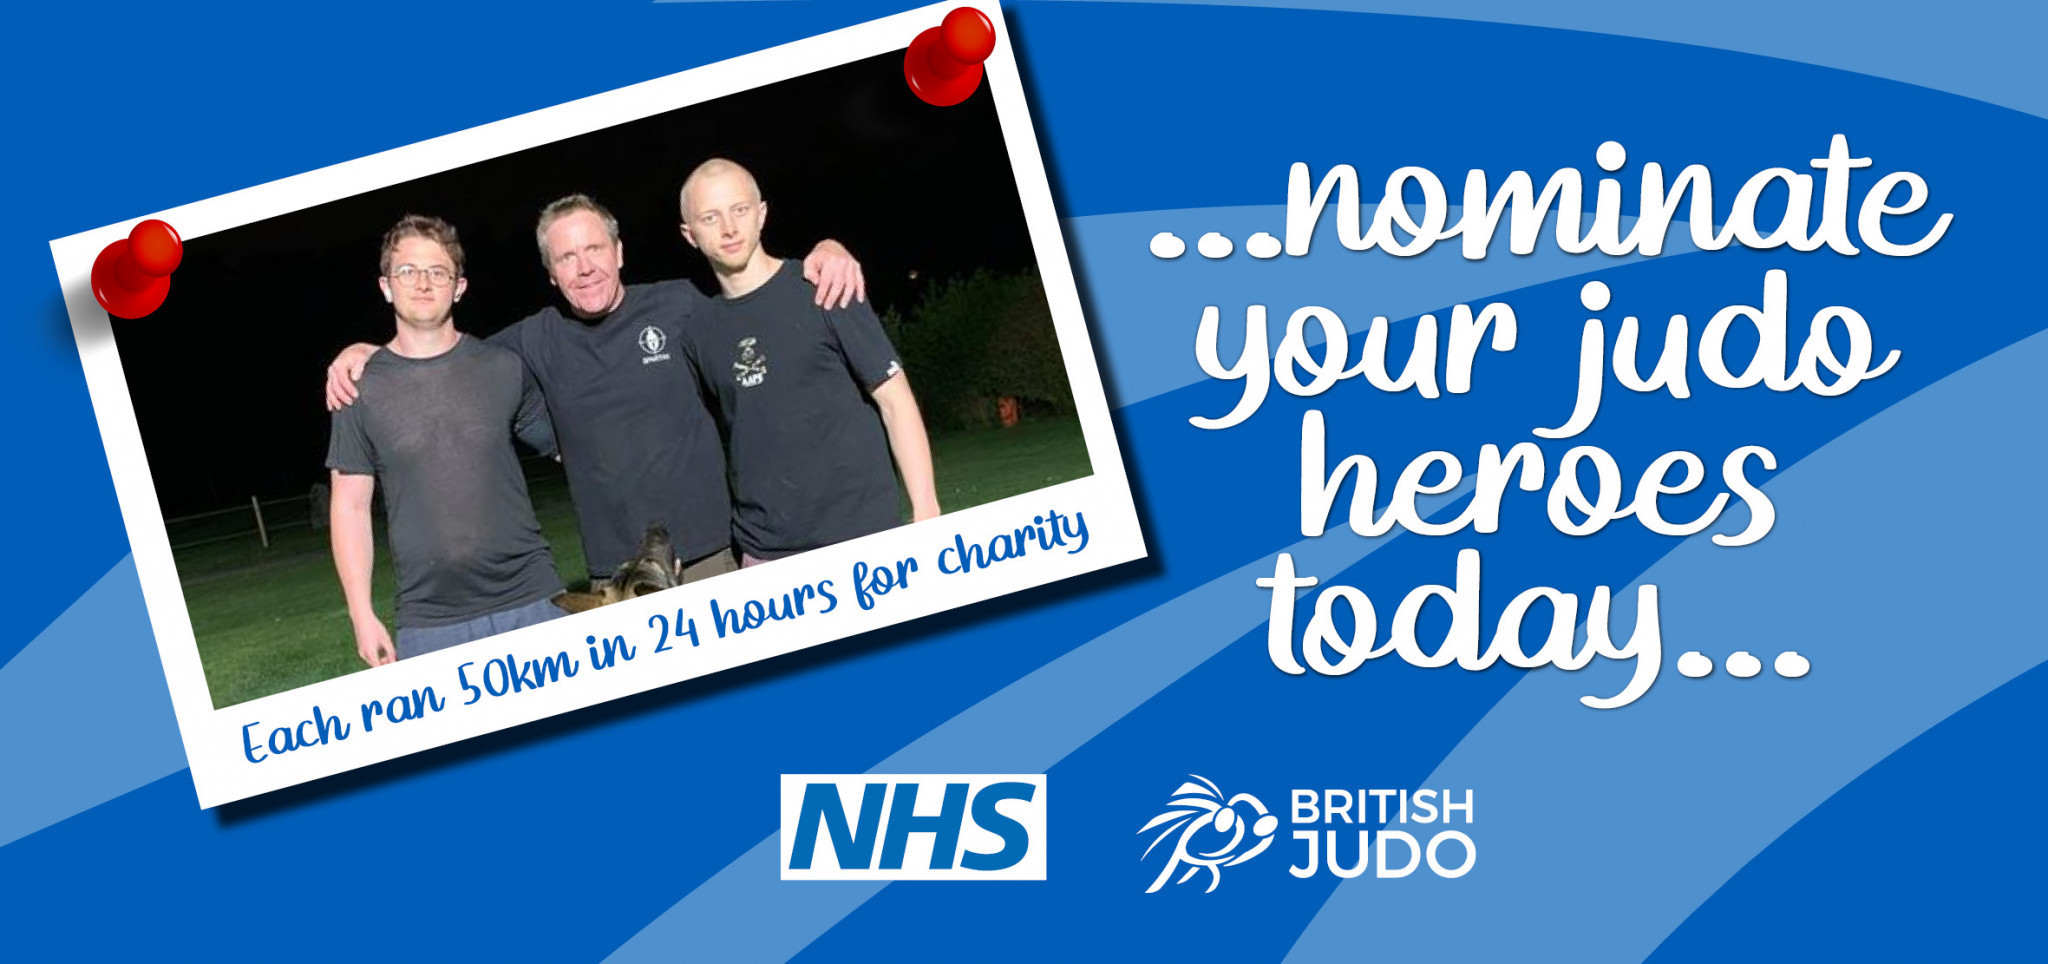 British Judo are looking for the sport's heroes during the ongoing pandemic in the UK ©British Judo